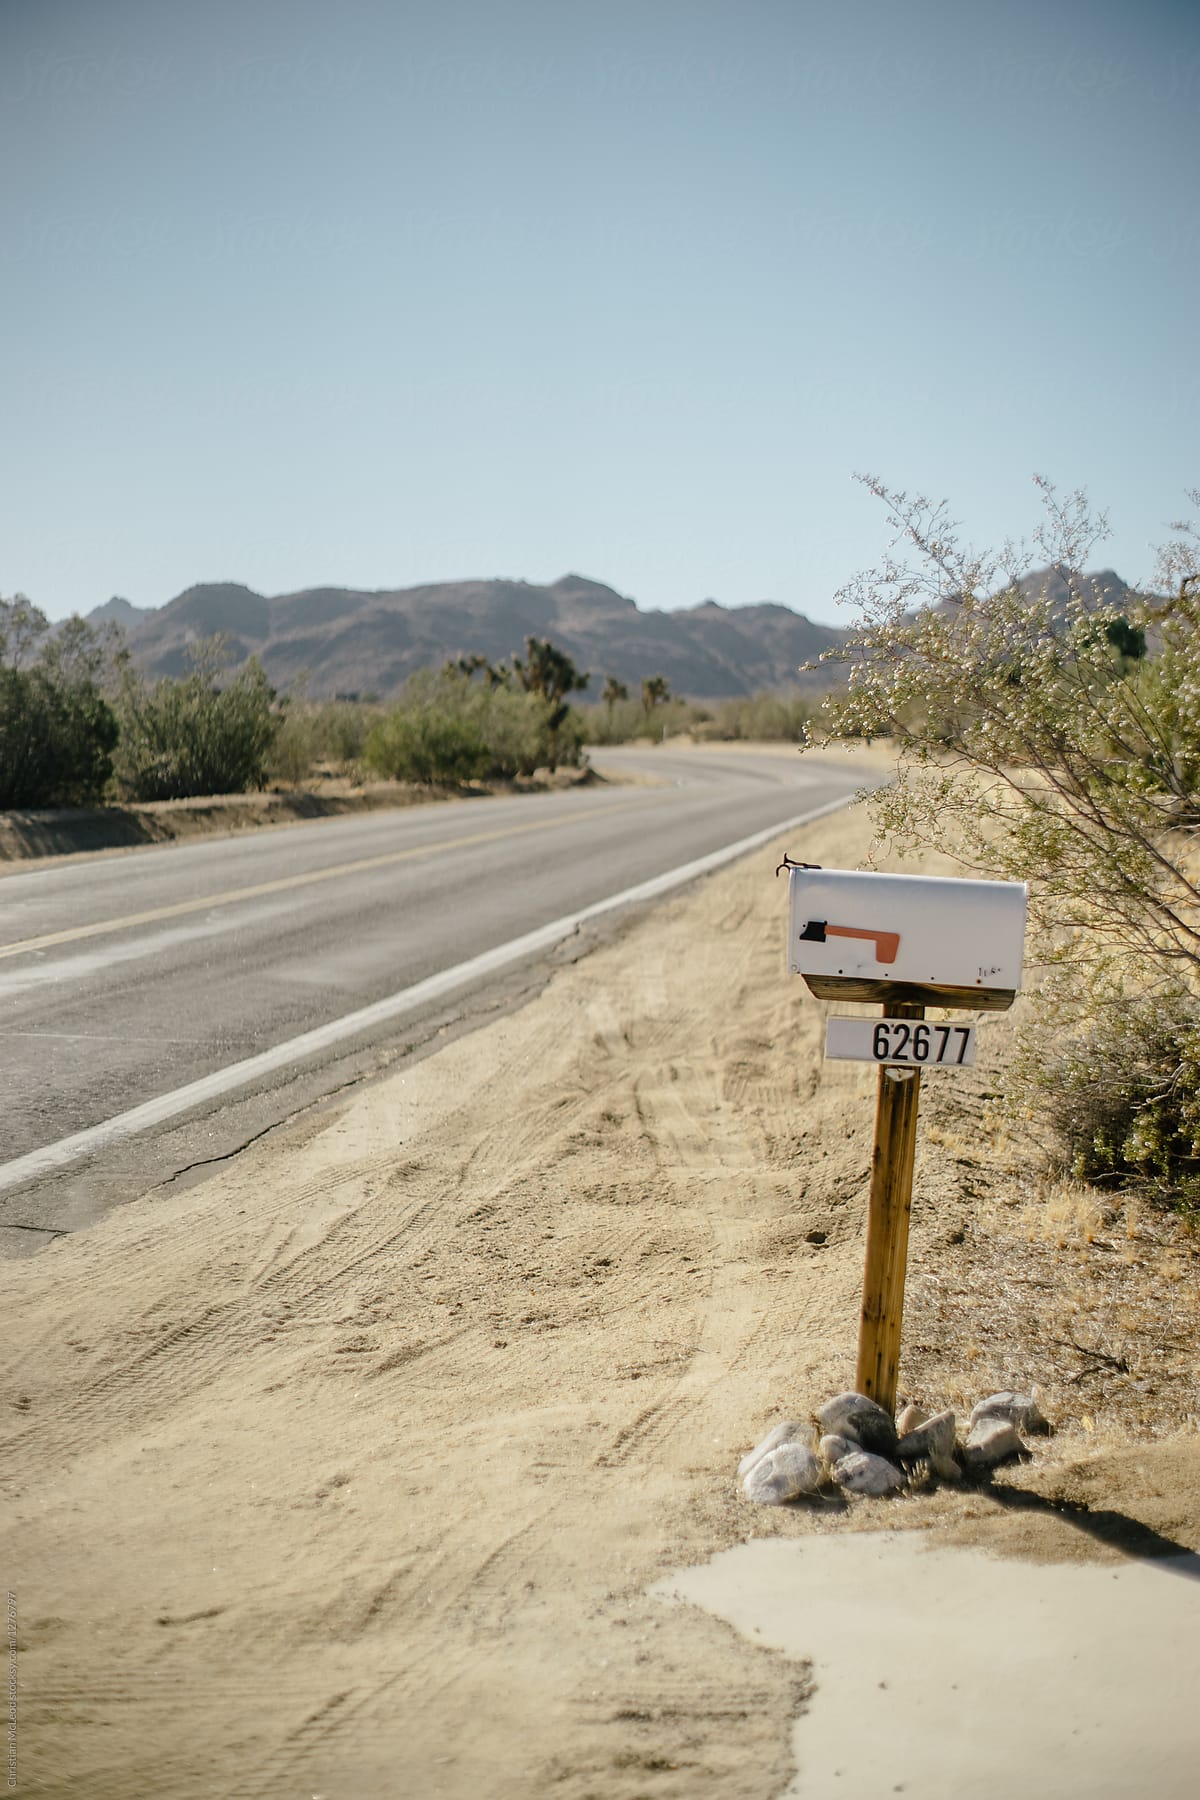 Desert Mailbox on the side of the road in Joshua Tree National Park